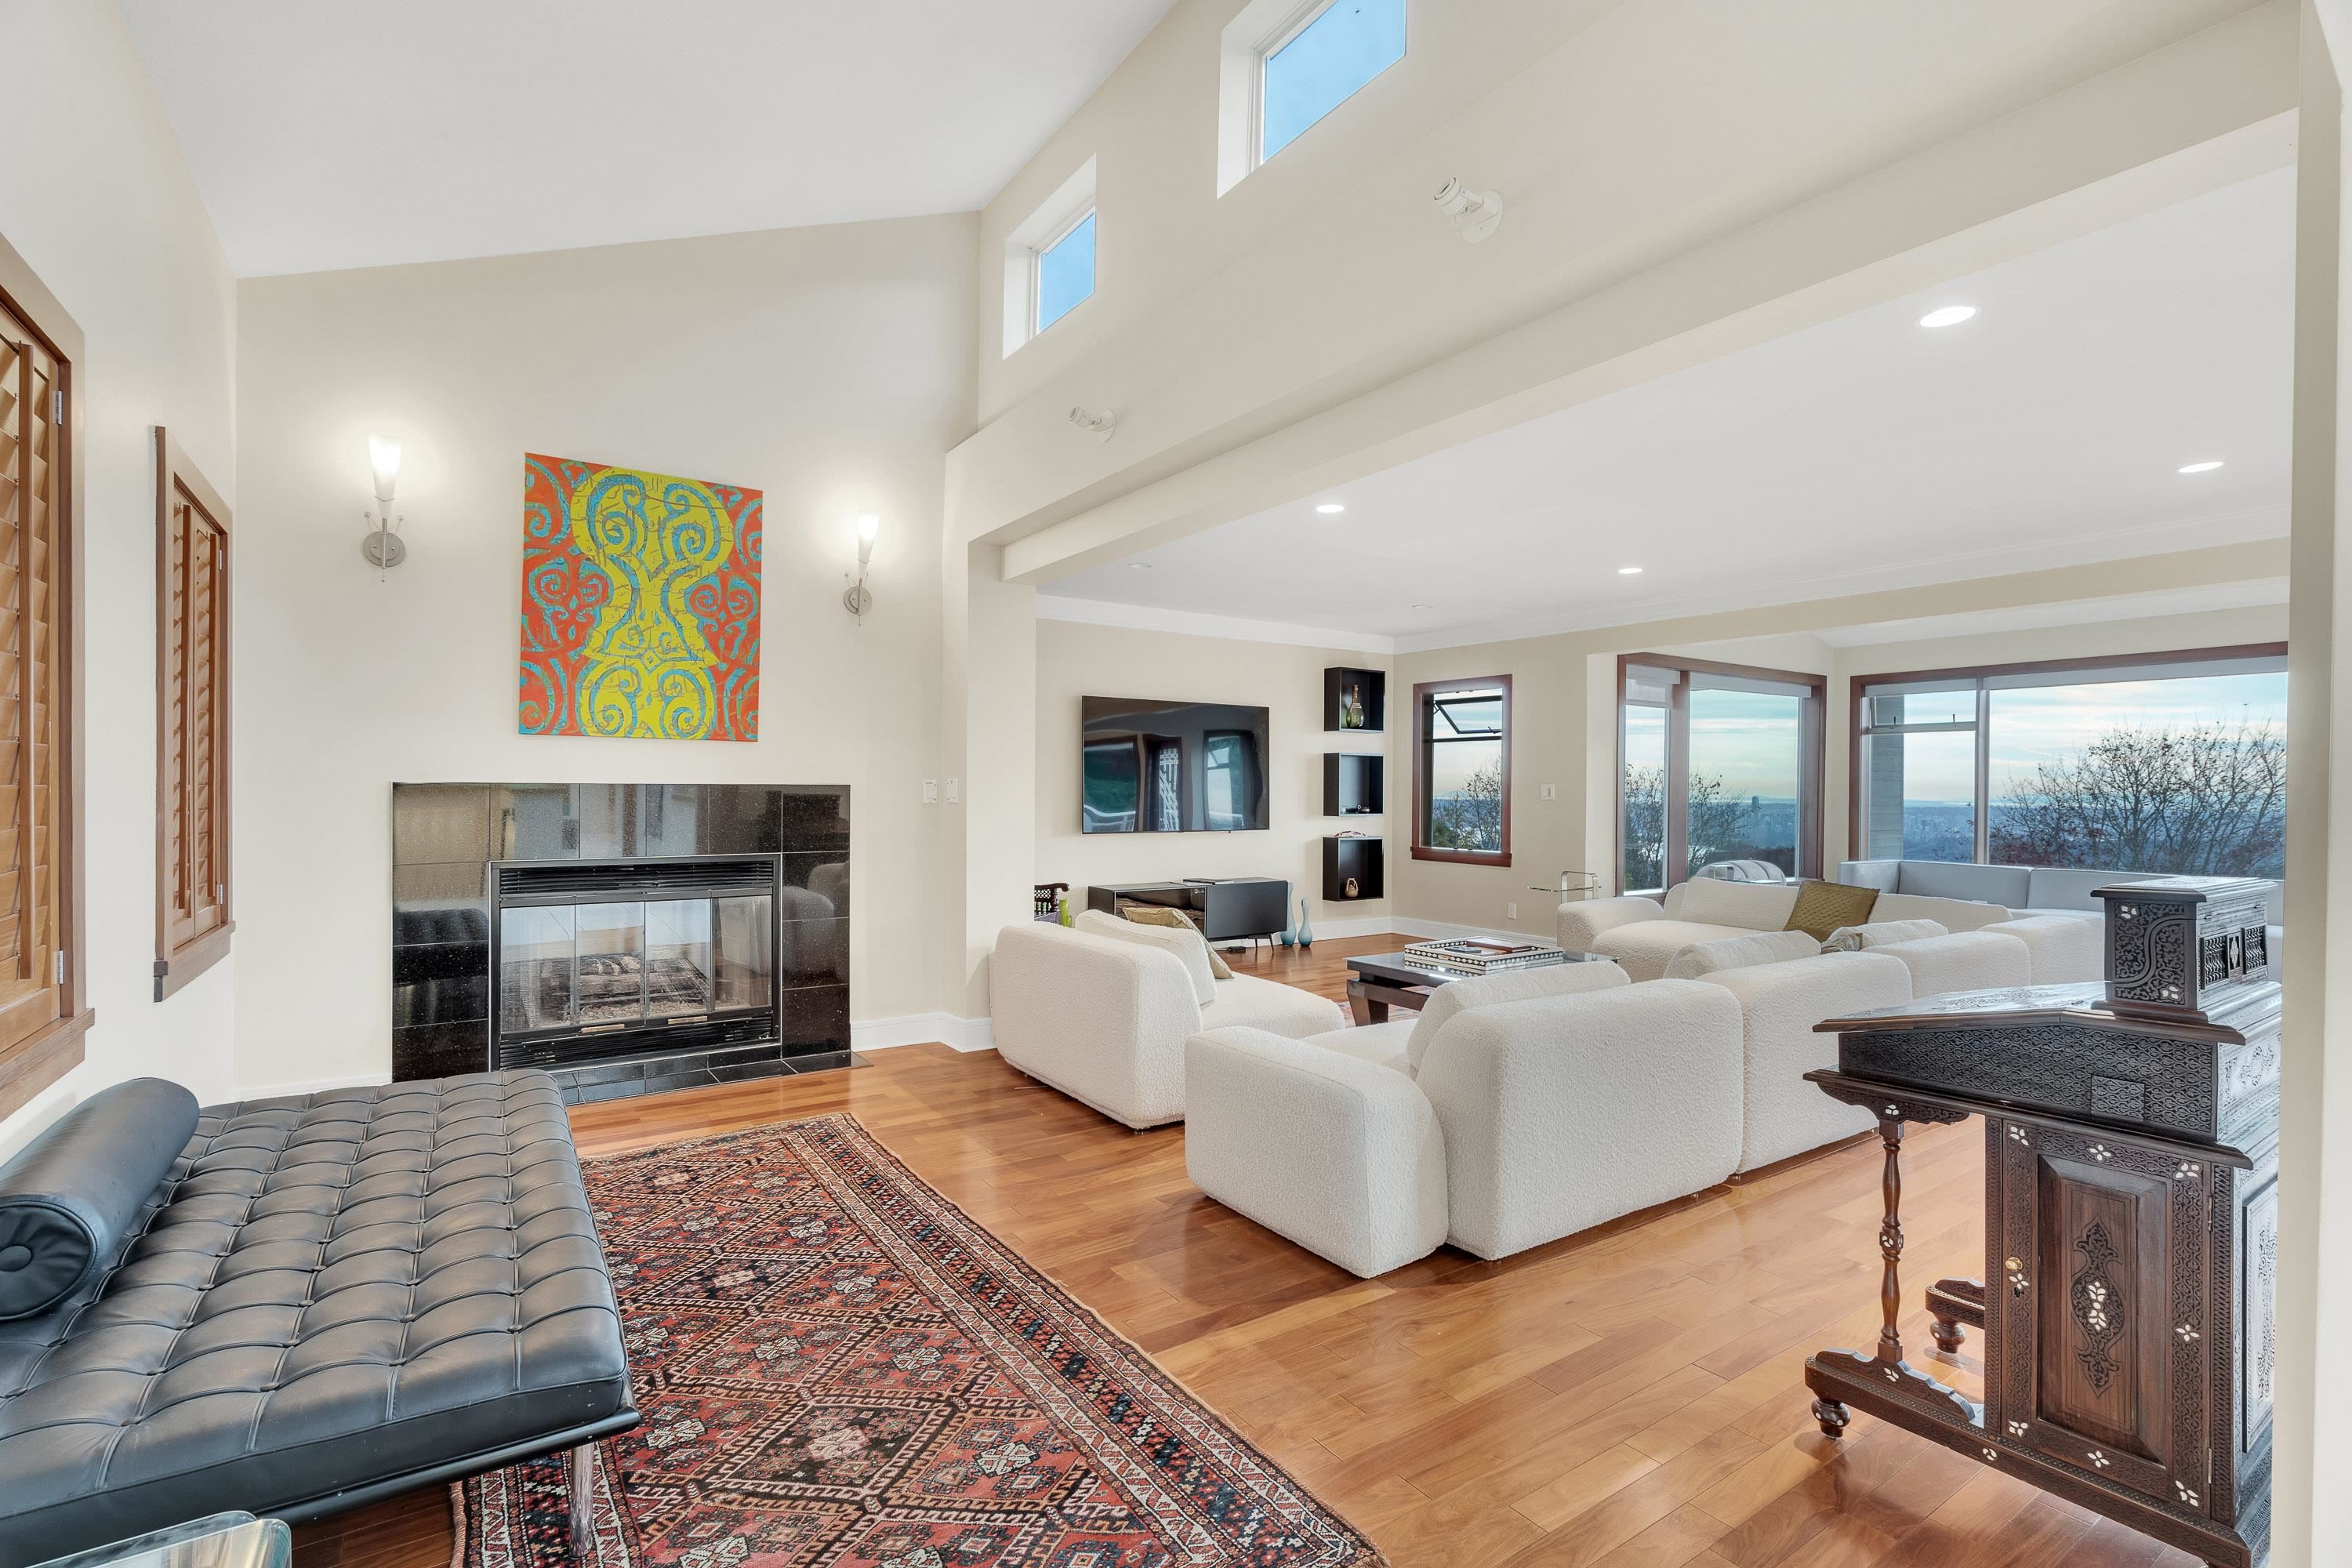 Listing image of 1035 KING GEORGES WAY